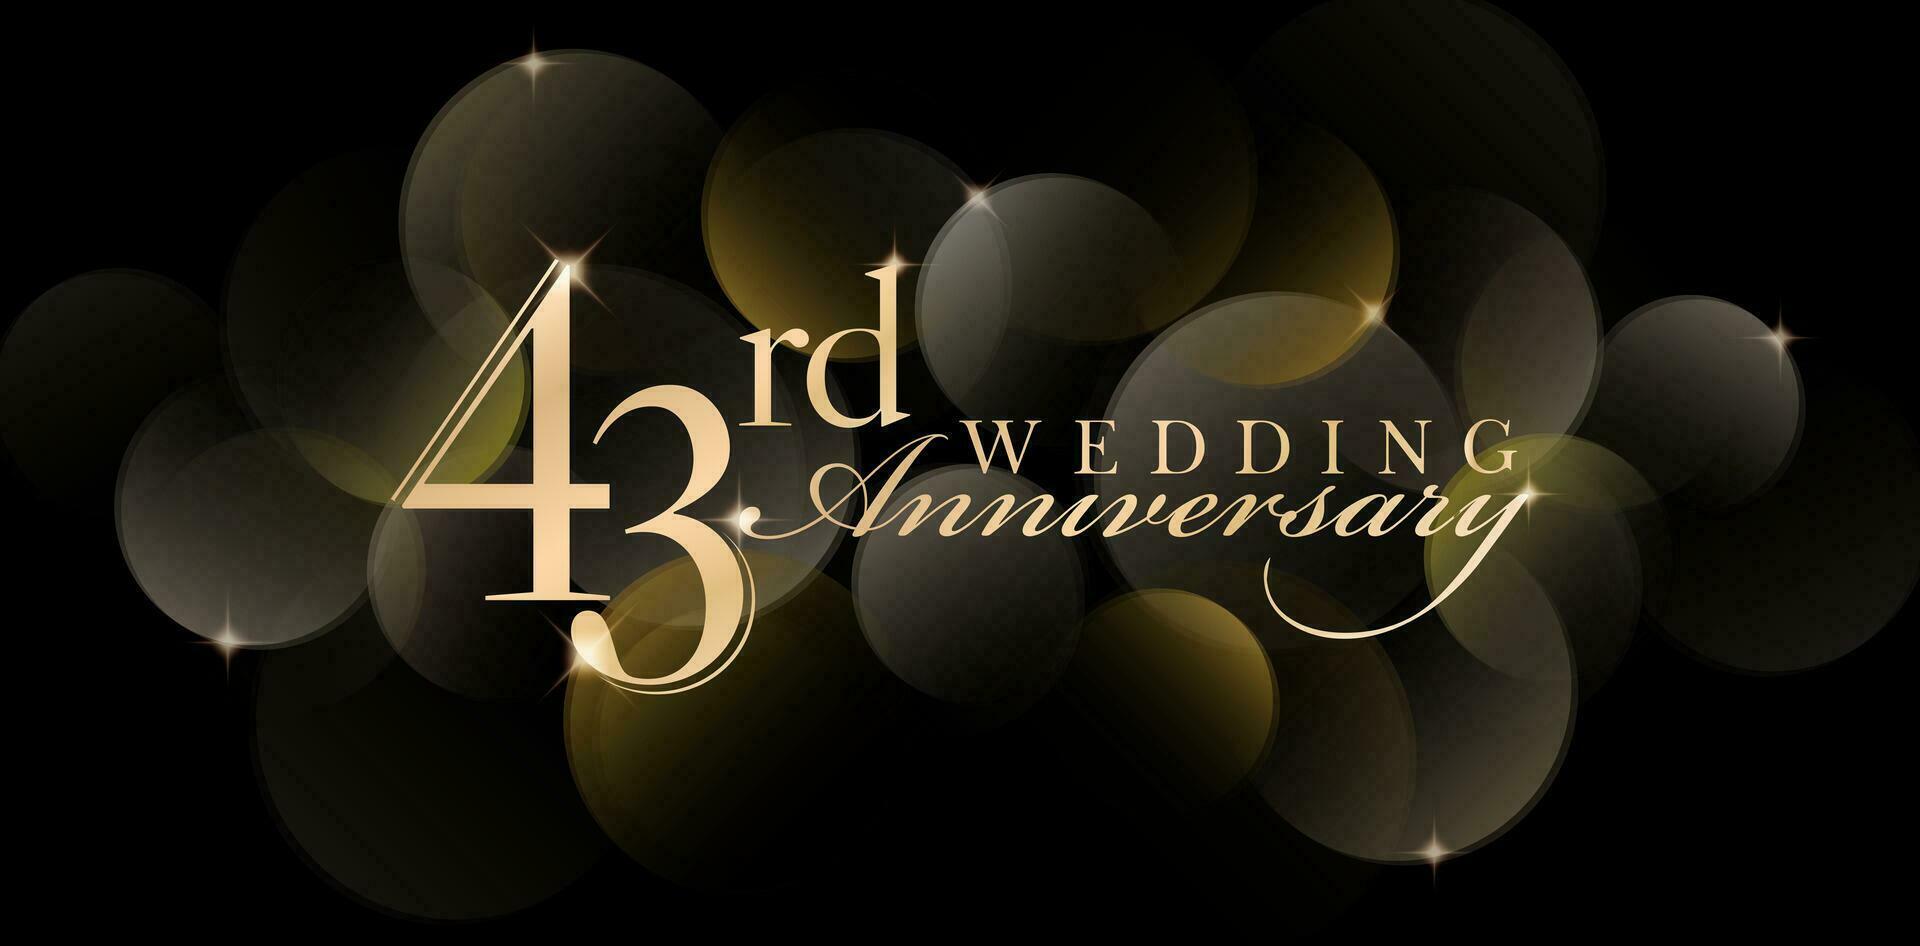 43rd wedding anniversary number of symbol sparkling glitter isolated black backgrounds. applicable for greeting cards, invitation, website banner and celebration company or business template design vector